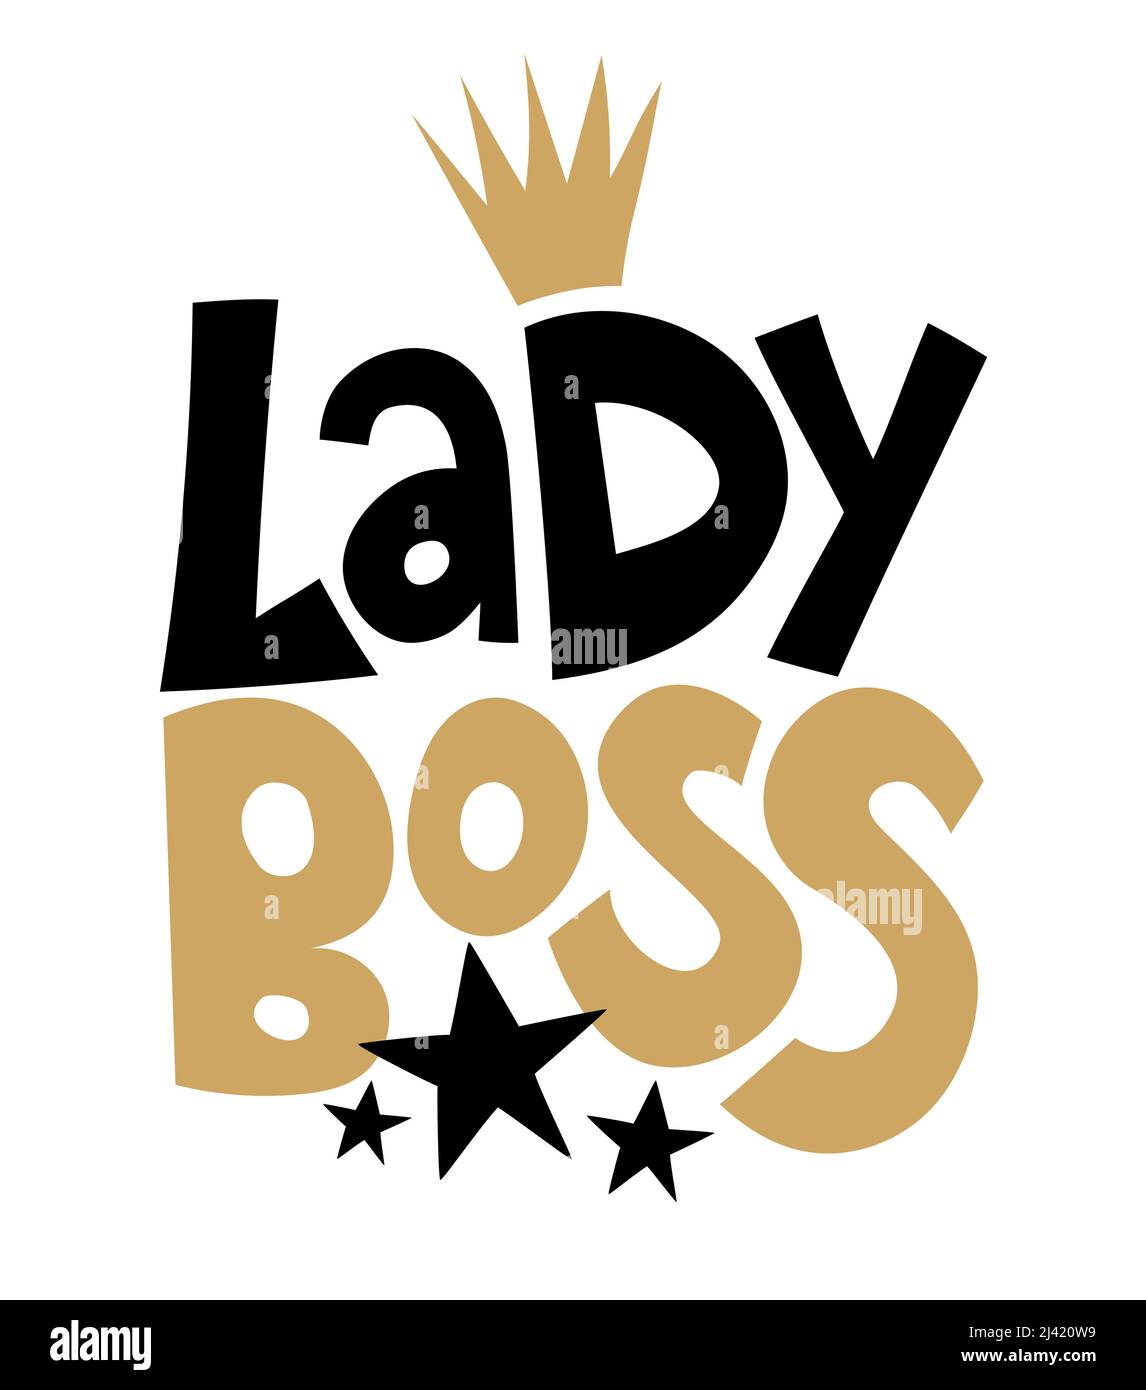 Lady boss Feminism slogan with hand drawn lettering. Print for poster, card. Stylish girl text motivational symbols. Vector illustration Stock Image & Art - Alamy